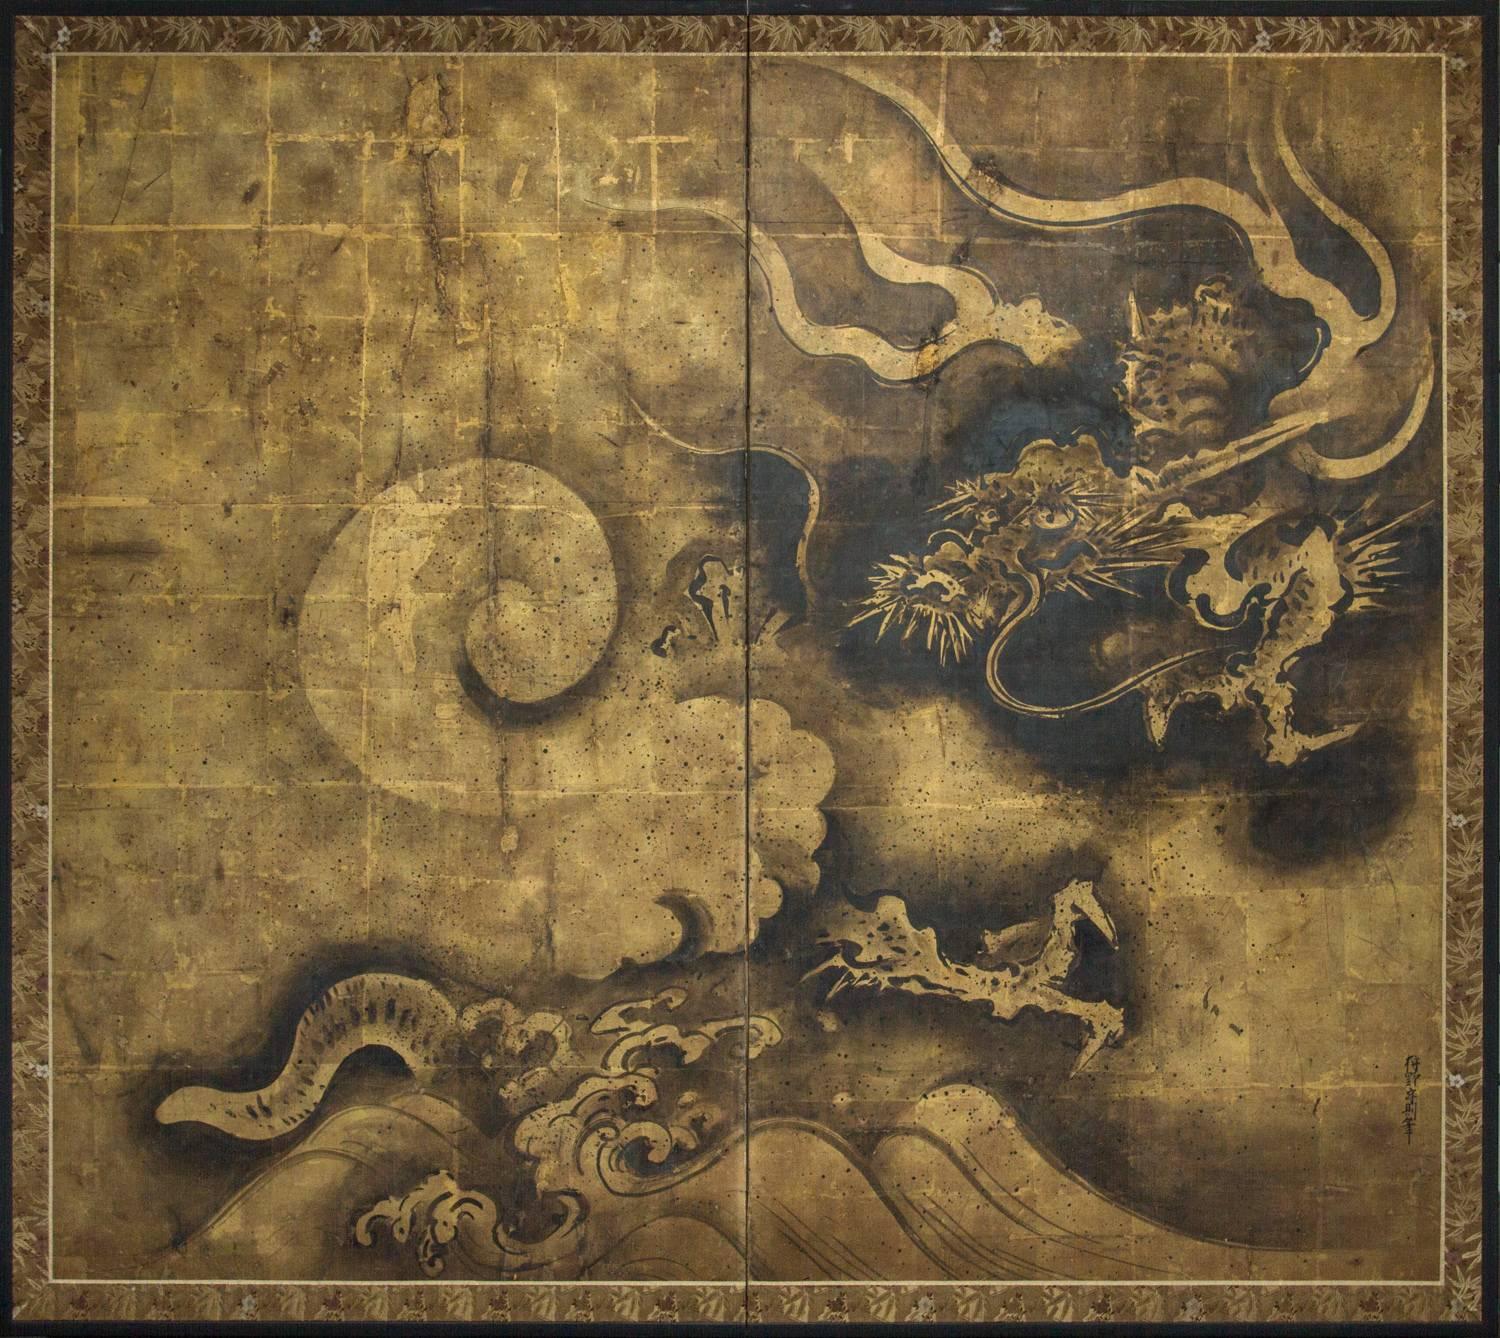 Bold and skillful painting of a dragon in the mist over crashing waves.  Painted in ink on beautifully patinated gold leaf with a silk brocade border.  Signature reads: Kano Morinori.